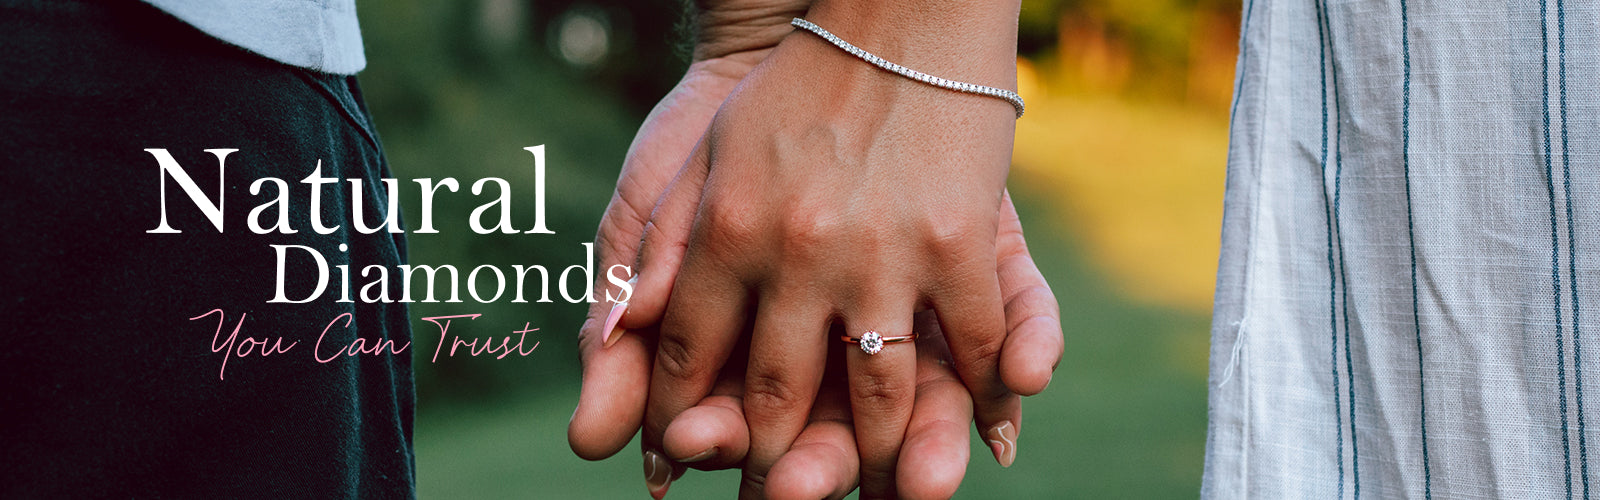 Natural Diamonds You Can Trust - text overlaying image of a couple holding hands, one with an engagement ring